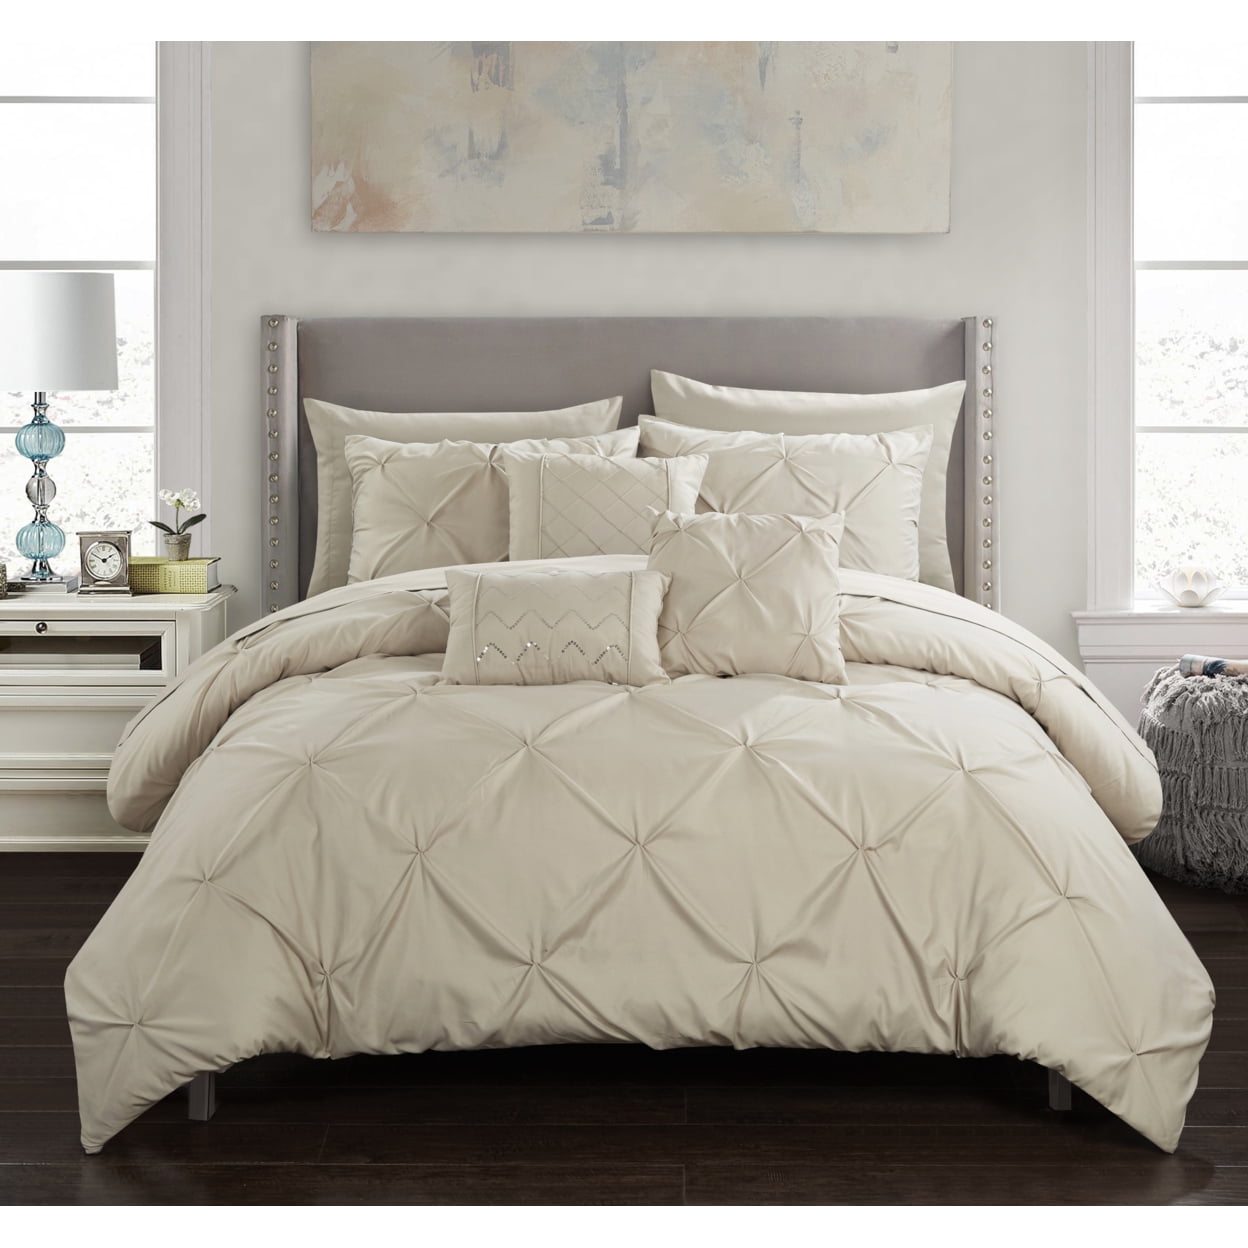 Alvatore Pinch Pleated Bed in a Bag Comforter Set